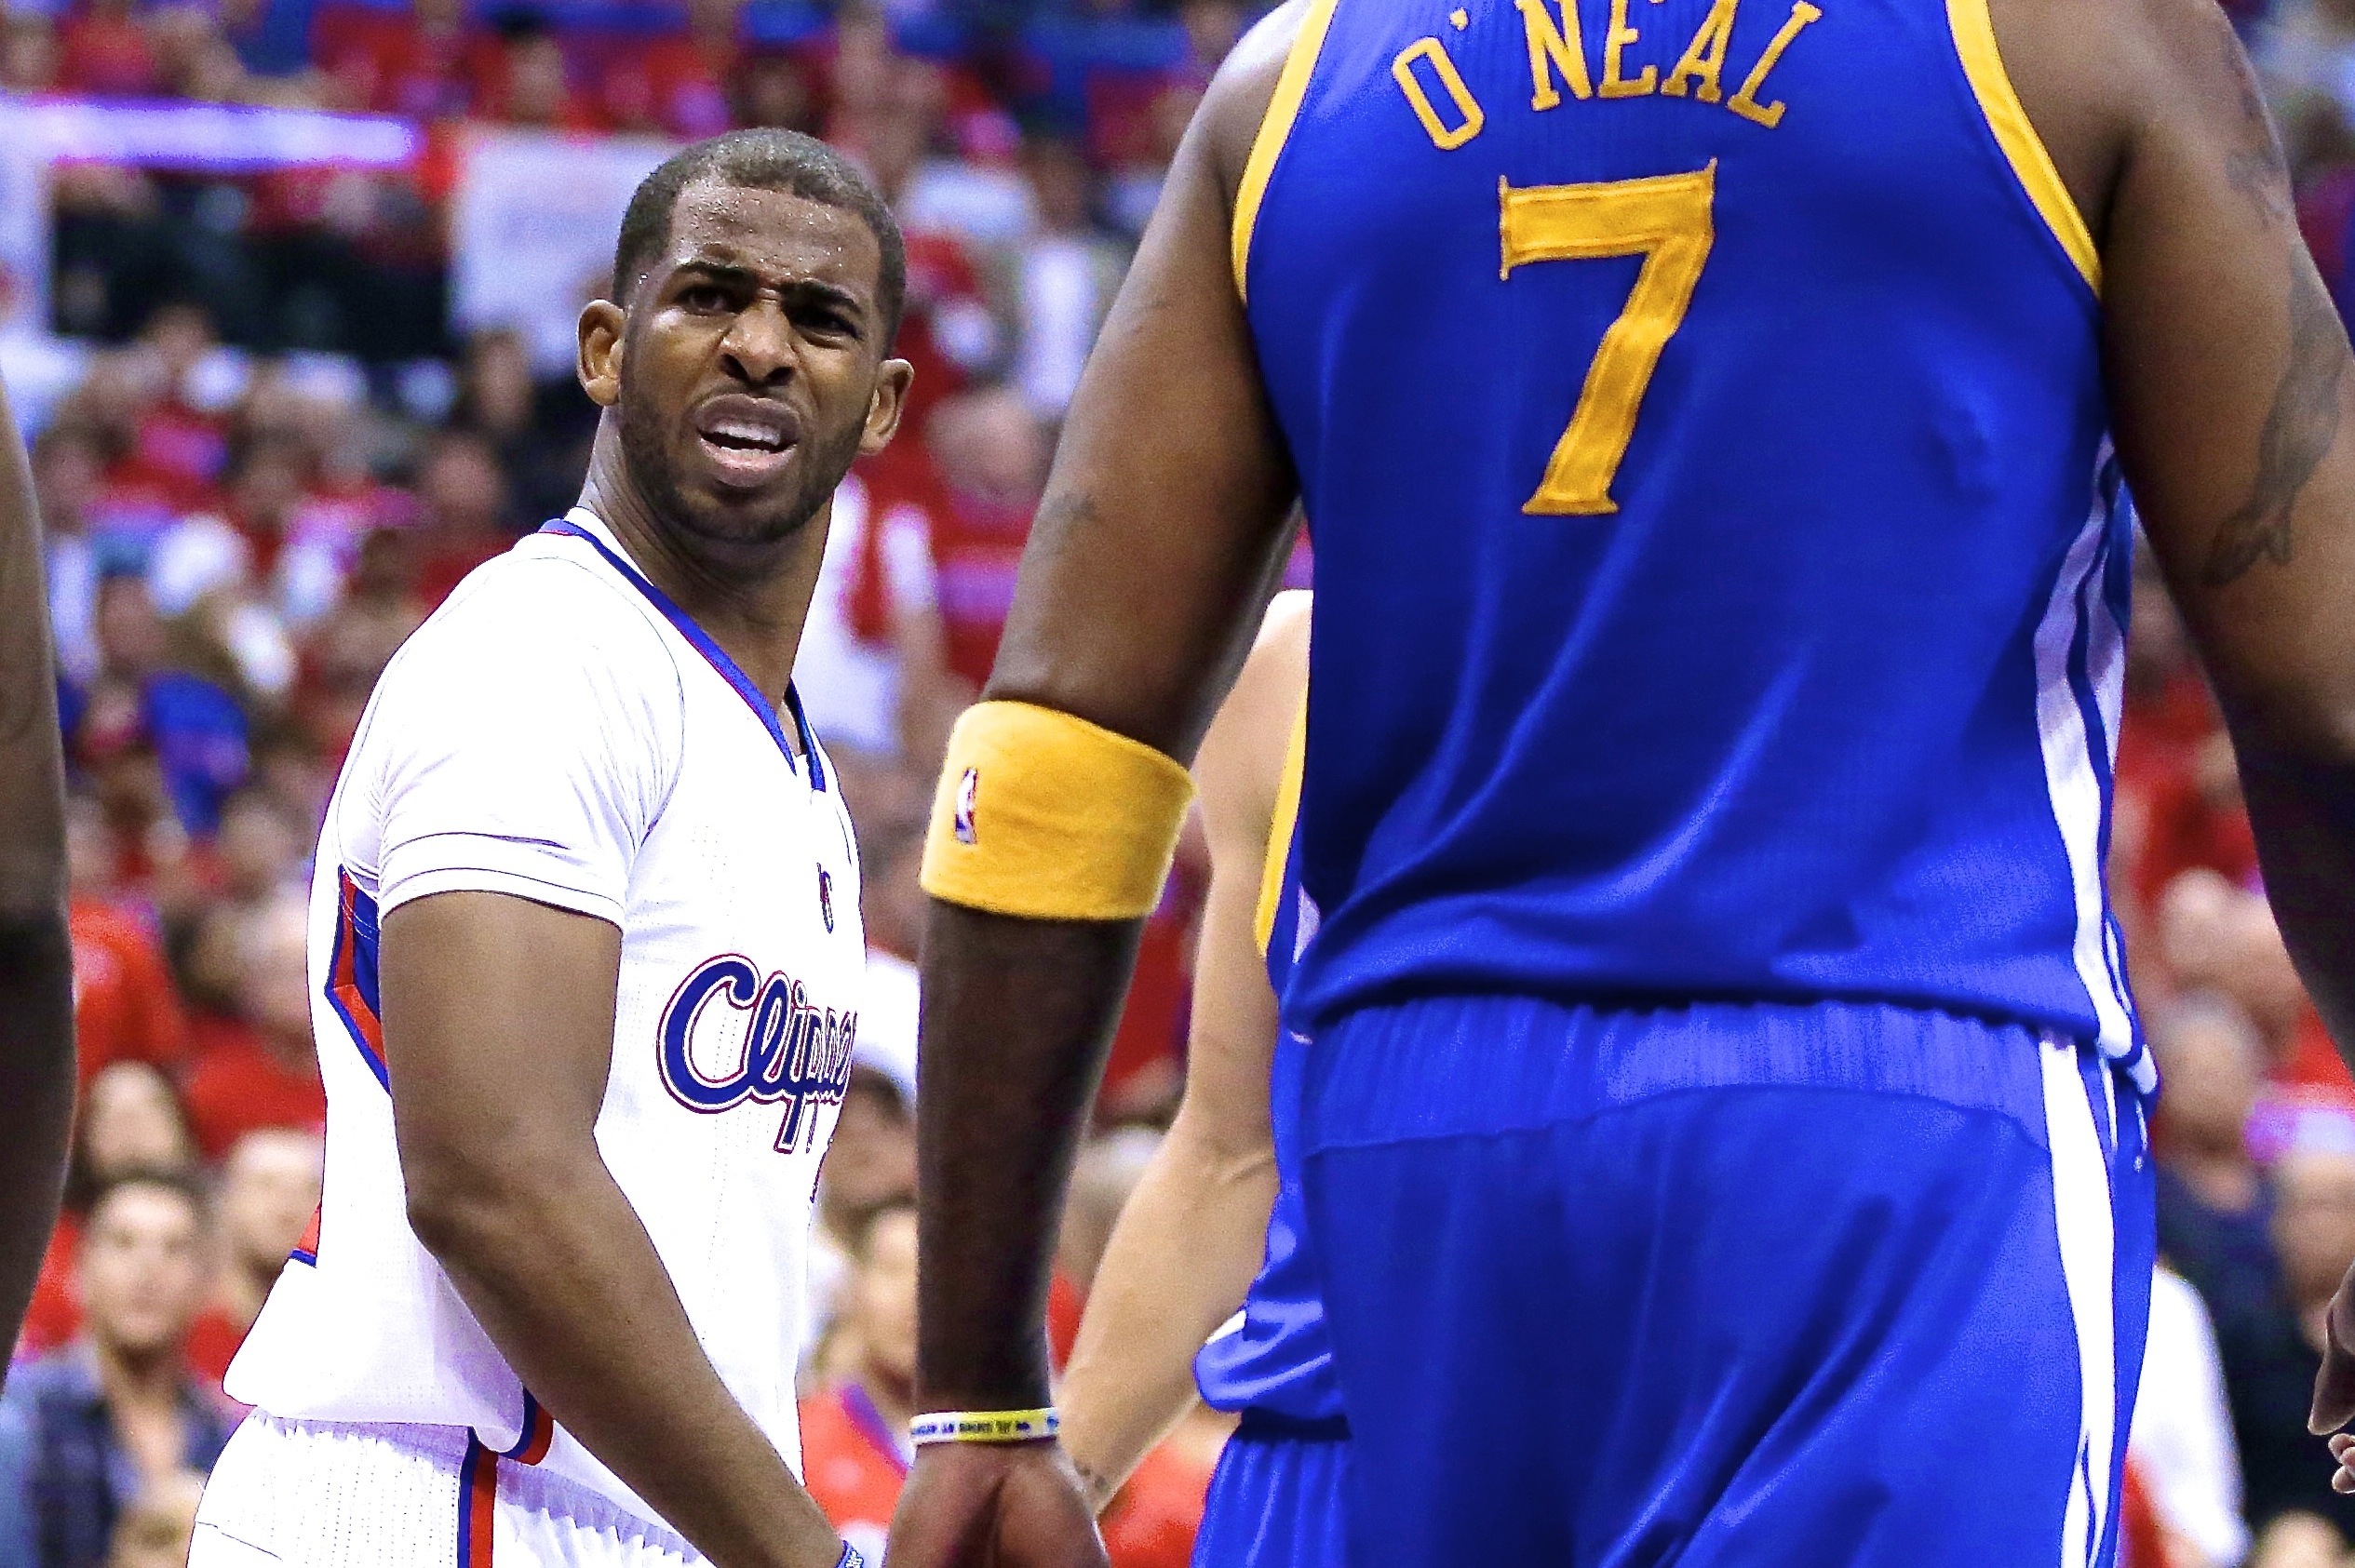 Clippers-Warriors Game 7 ends in hallway altercation